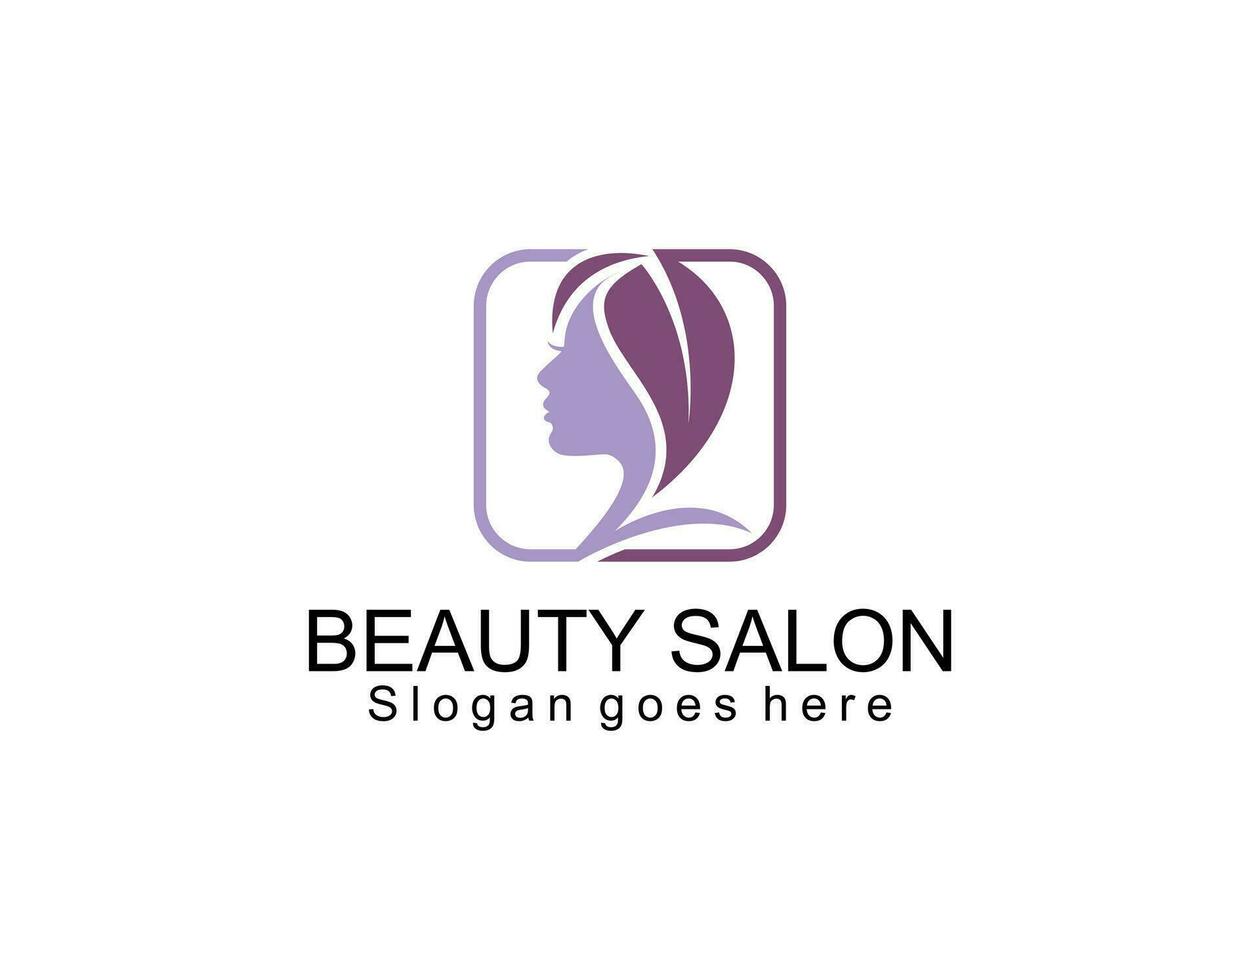 women face combine flower and branch logo for beauty salon, spa, cosmetic, and skin care. elegant logo design and business card. vector